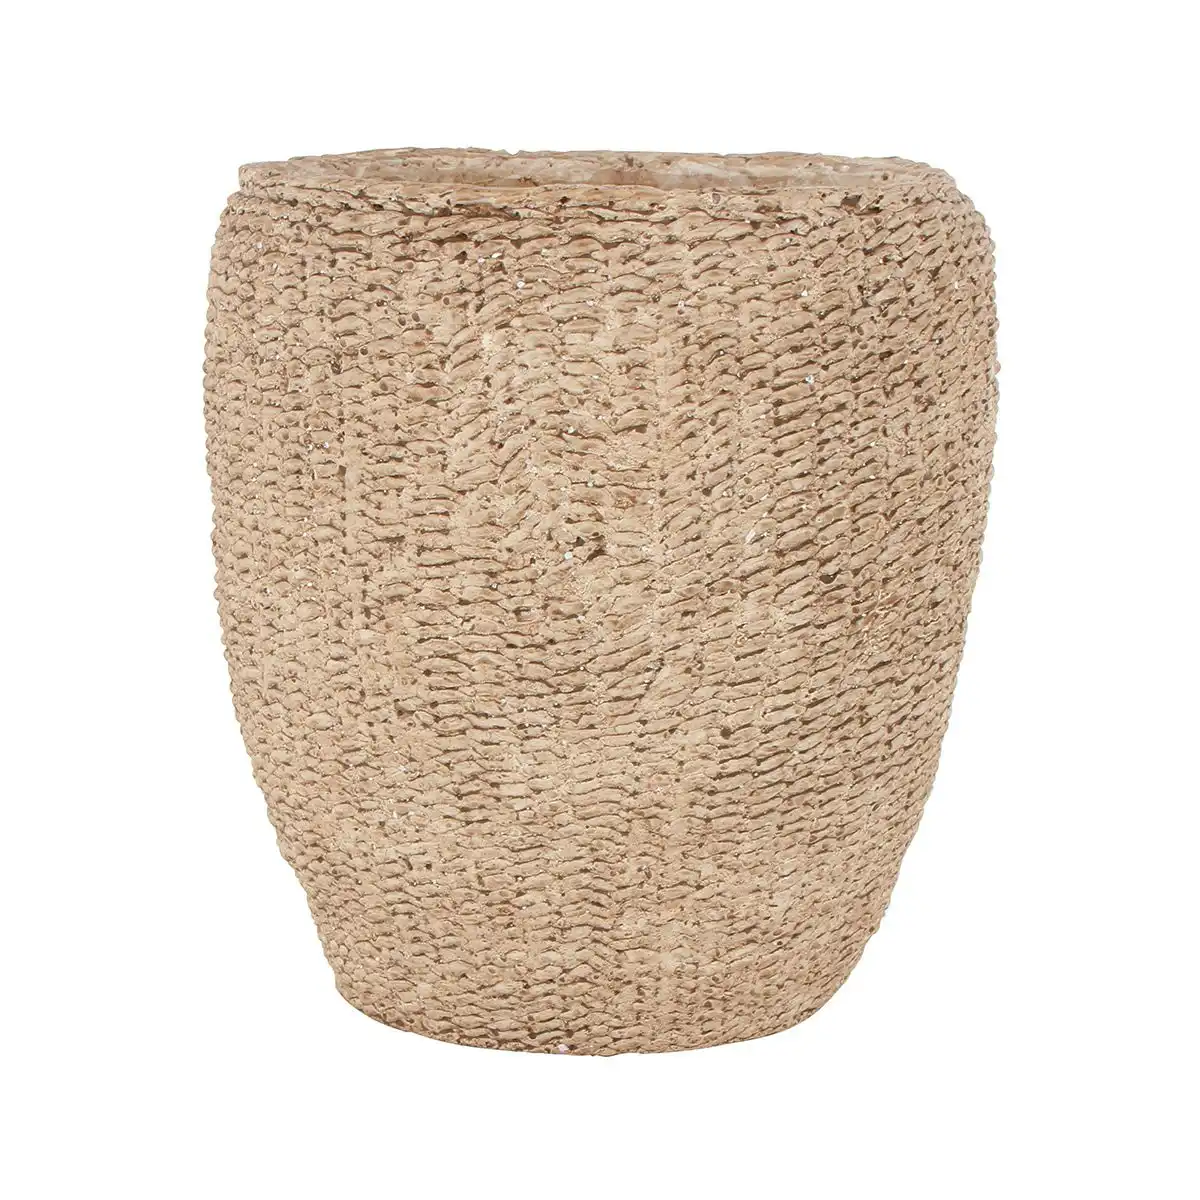 Ikra Nap Cement Pot With Hole And Stopper 29cm